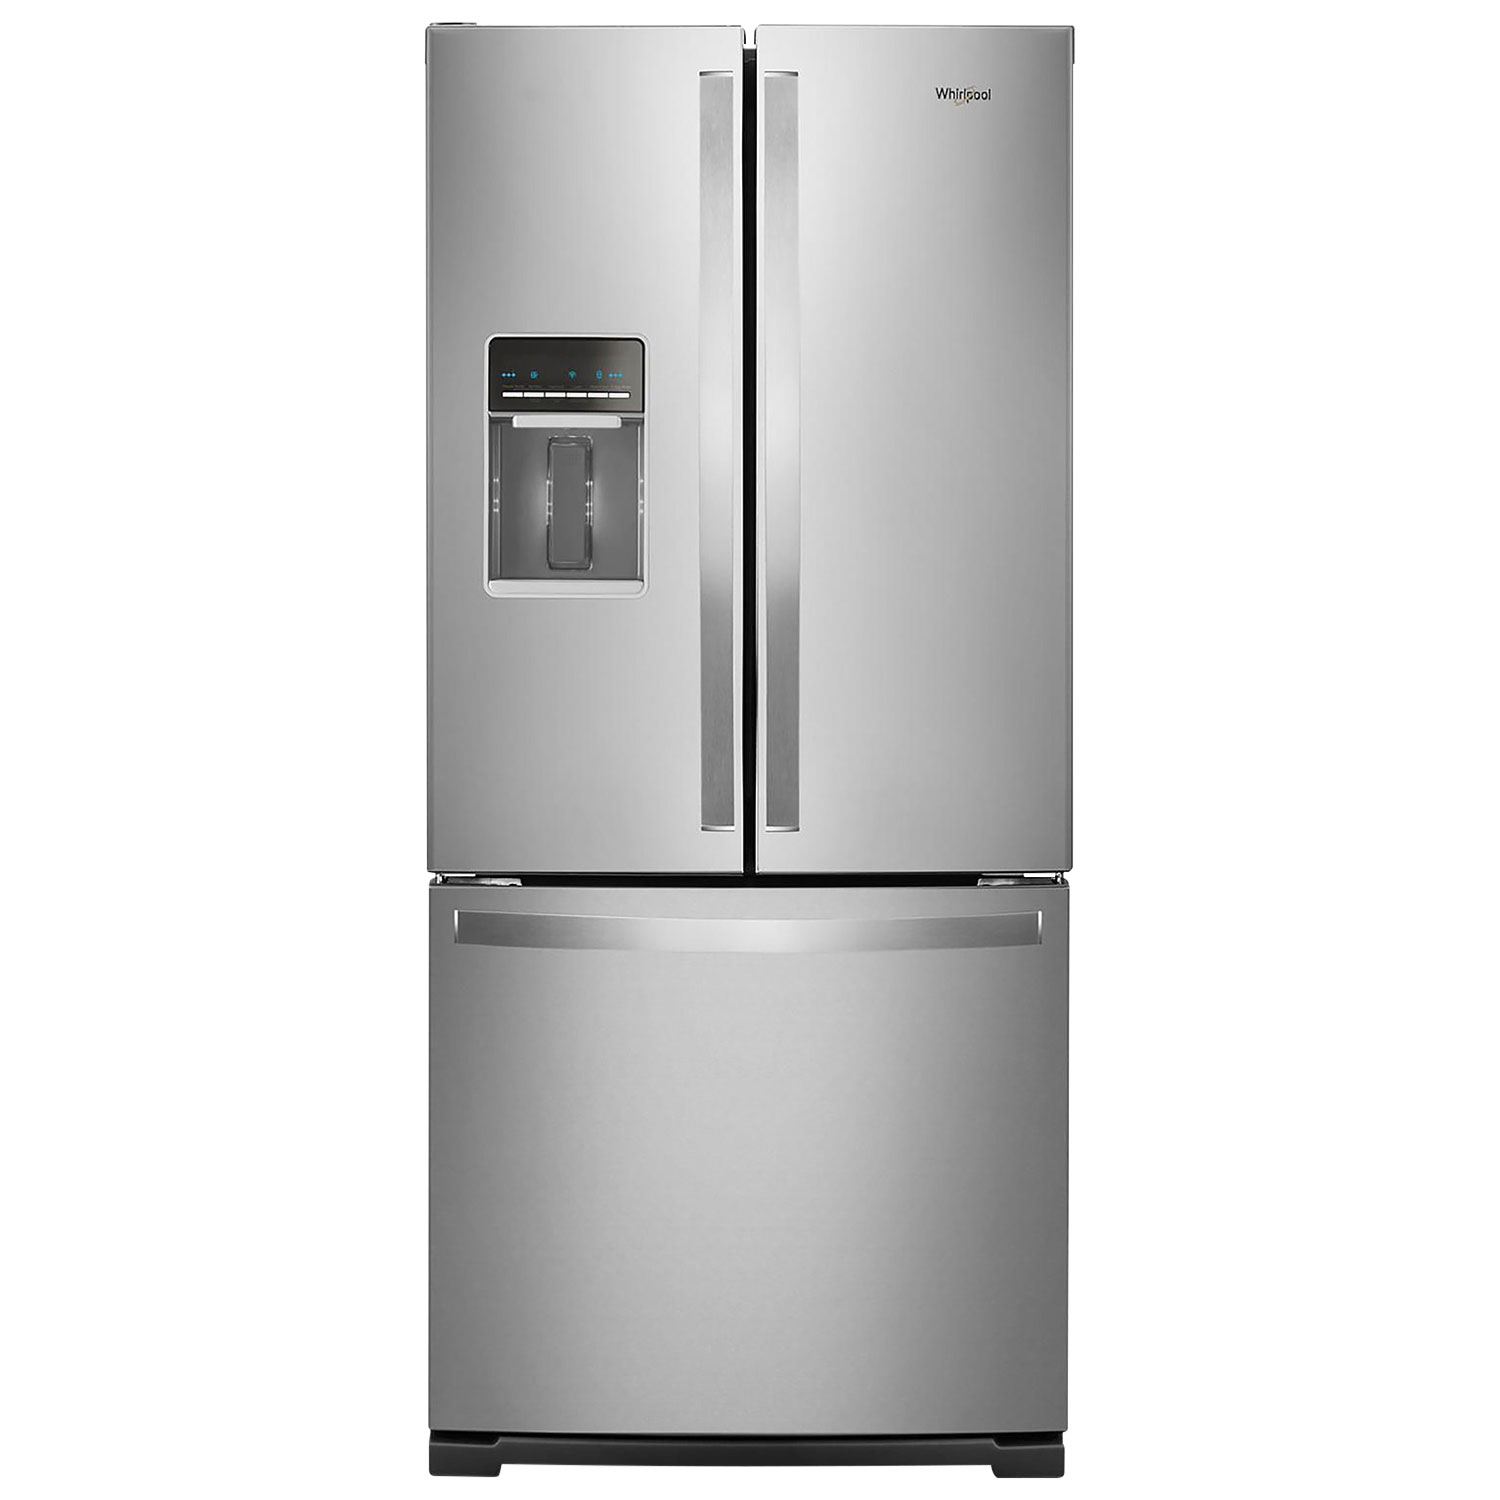 Whirlpool 30" 19.7 Cu. Ft. French Door Refrigerator with Water Dispenser (WRF560SEHZ) - Stainless Steel